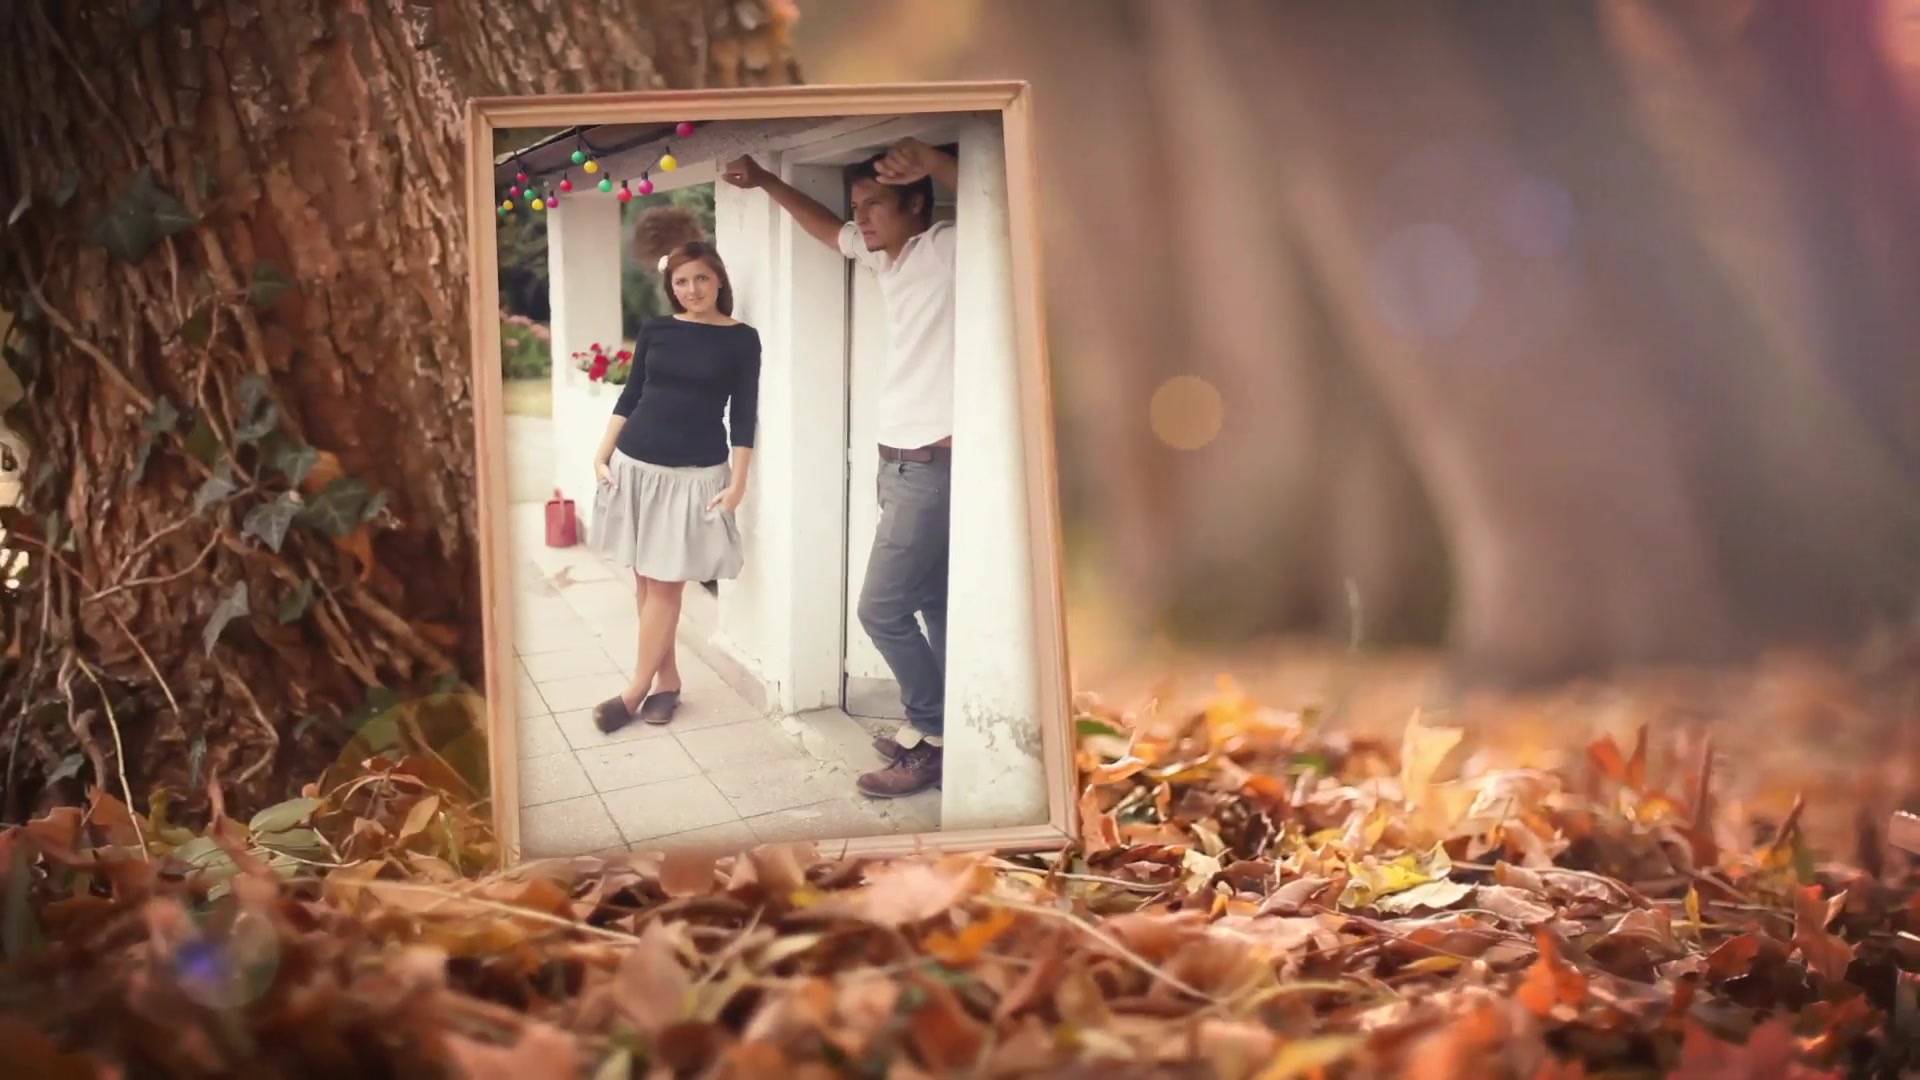 Autumn Photo Frames - Download Videohive 6583597